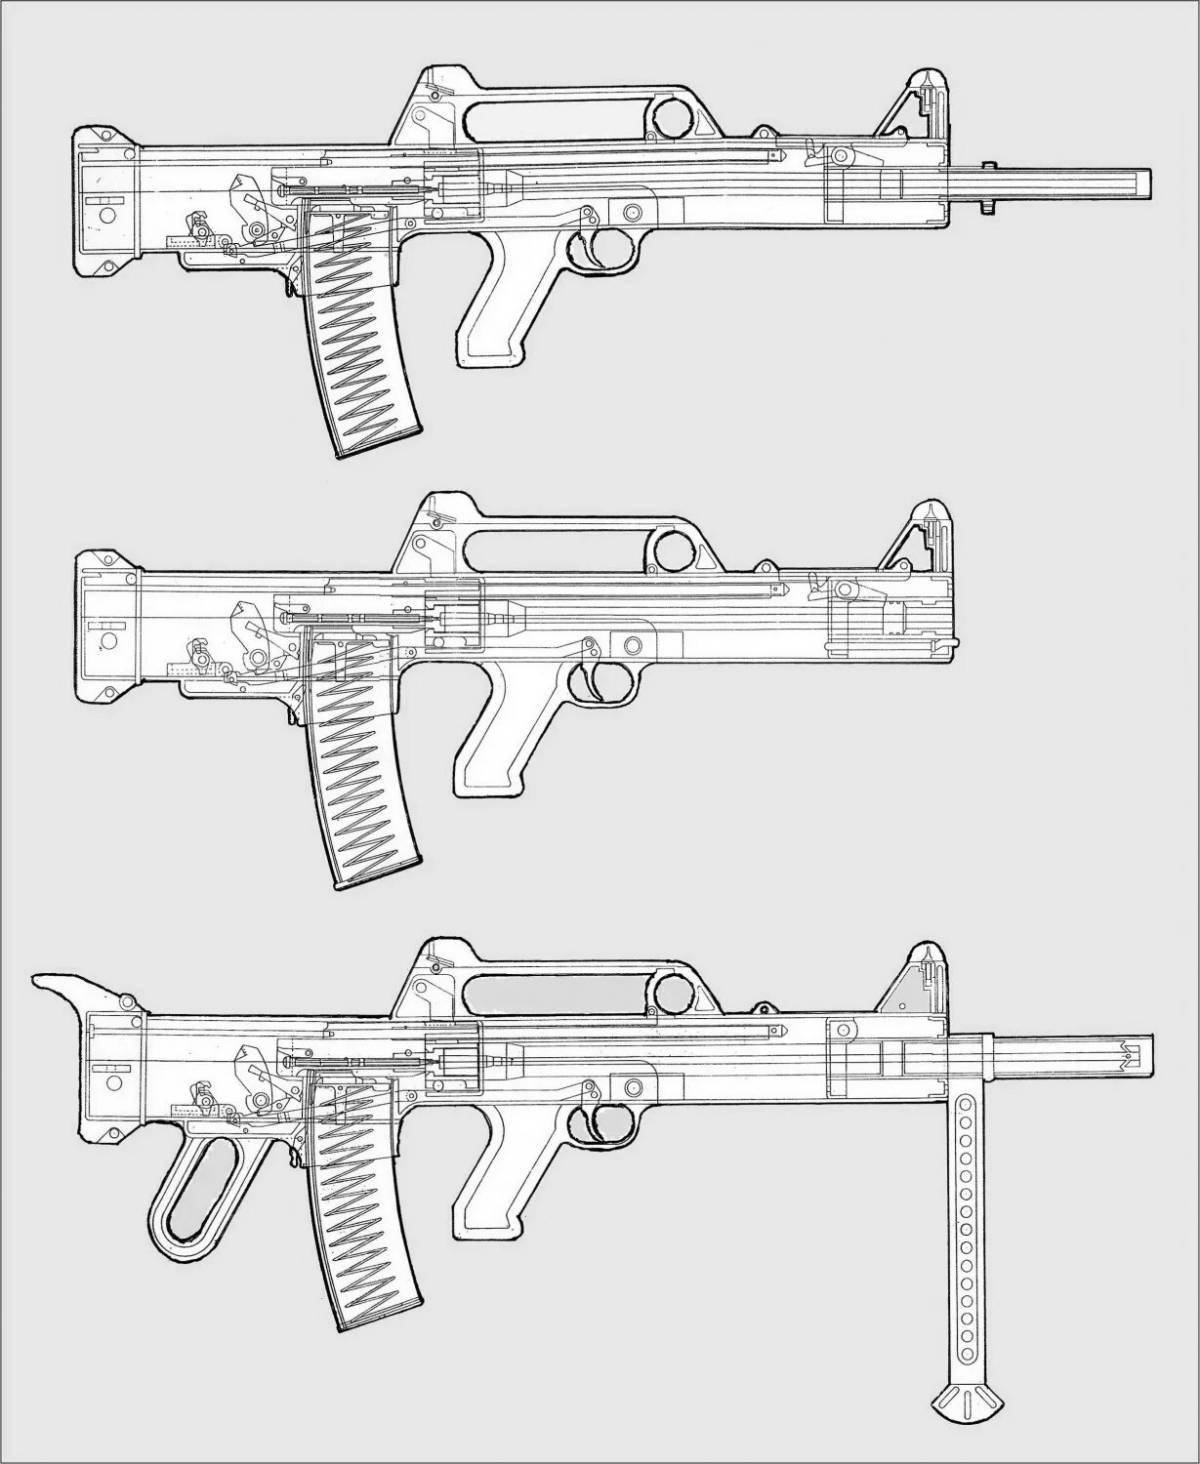 Humorous coloring of firearms